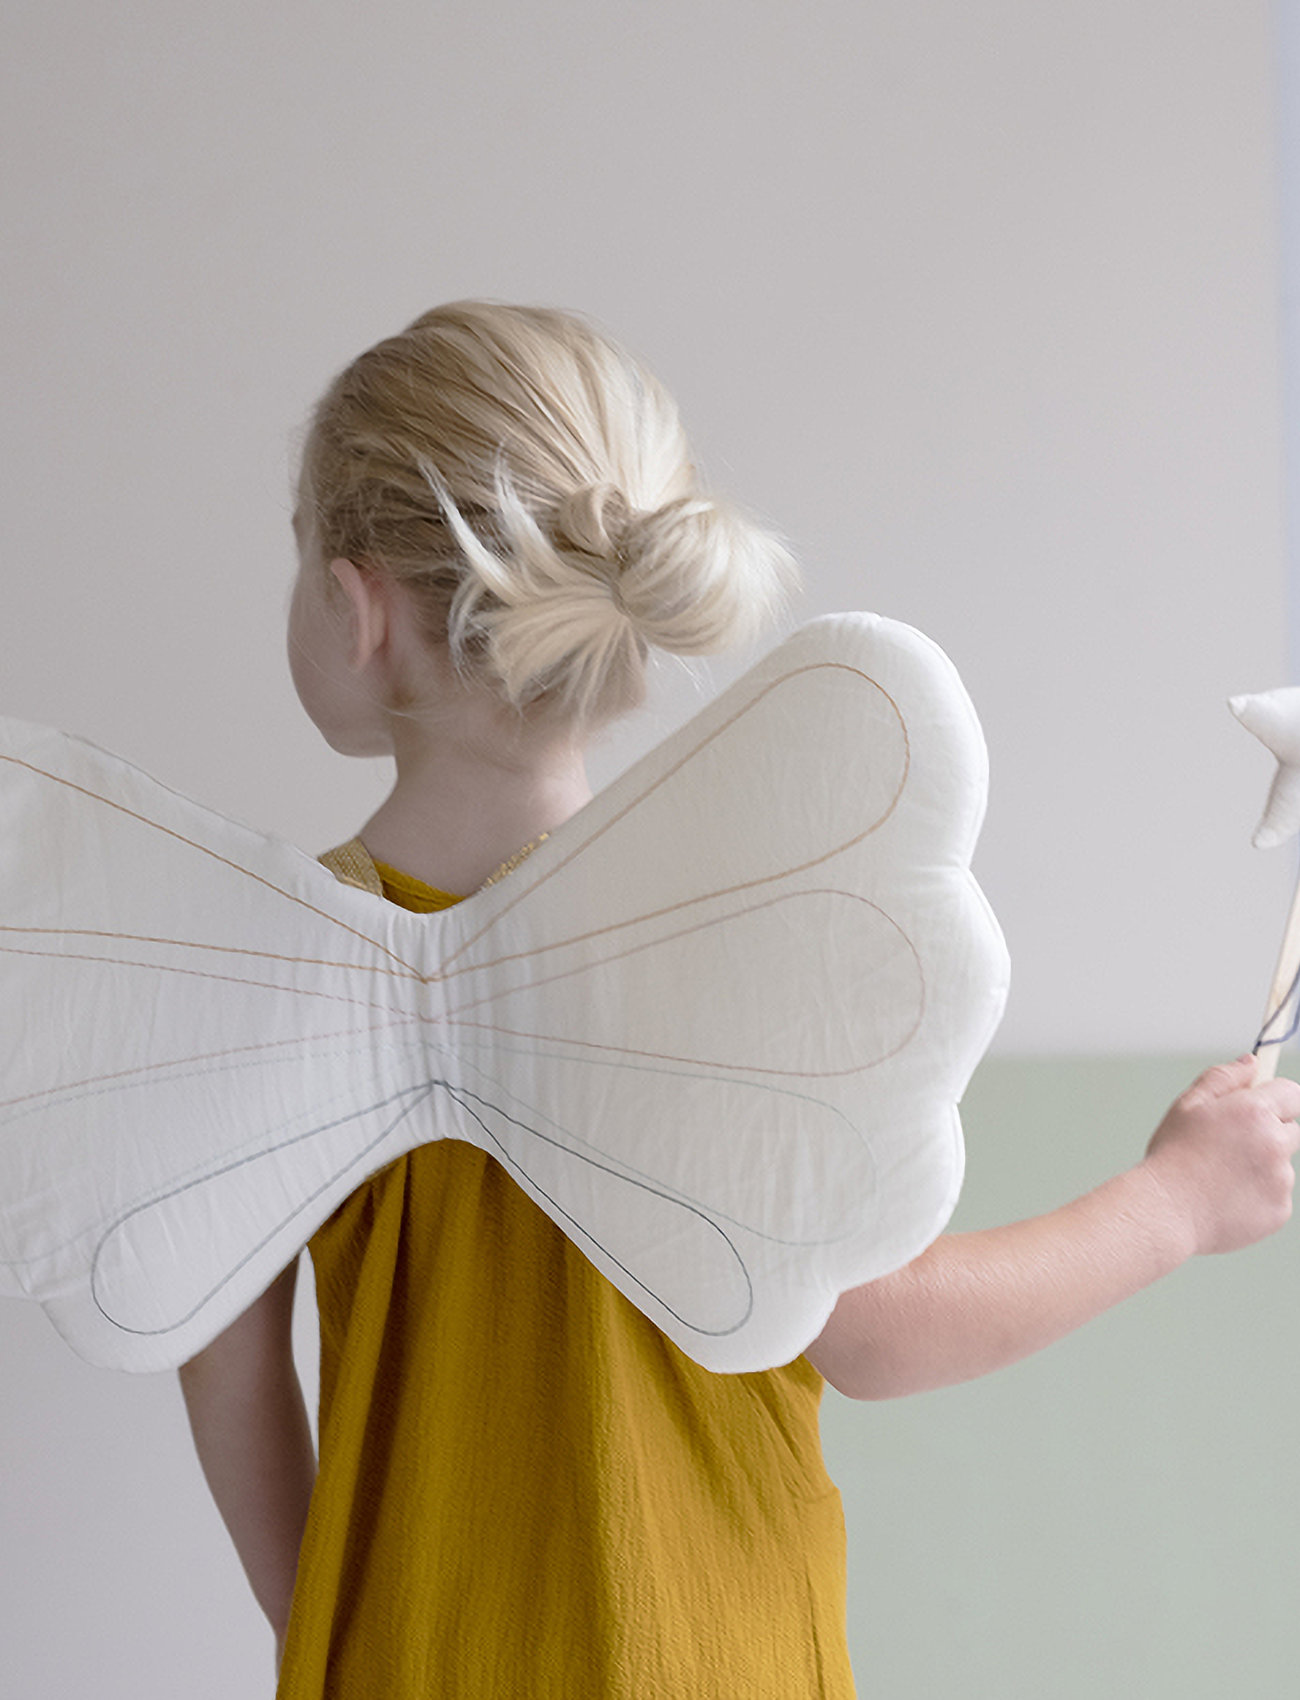 Fabelab - Wings - Rainbow - Natural - costume accessories - natural - 1